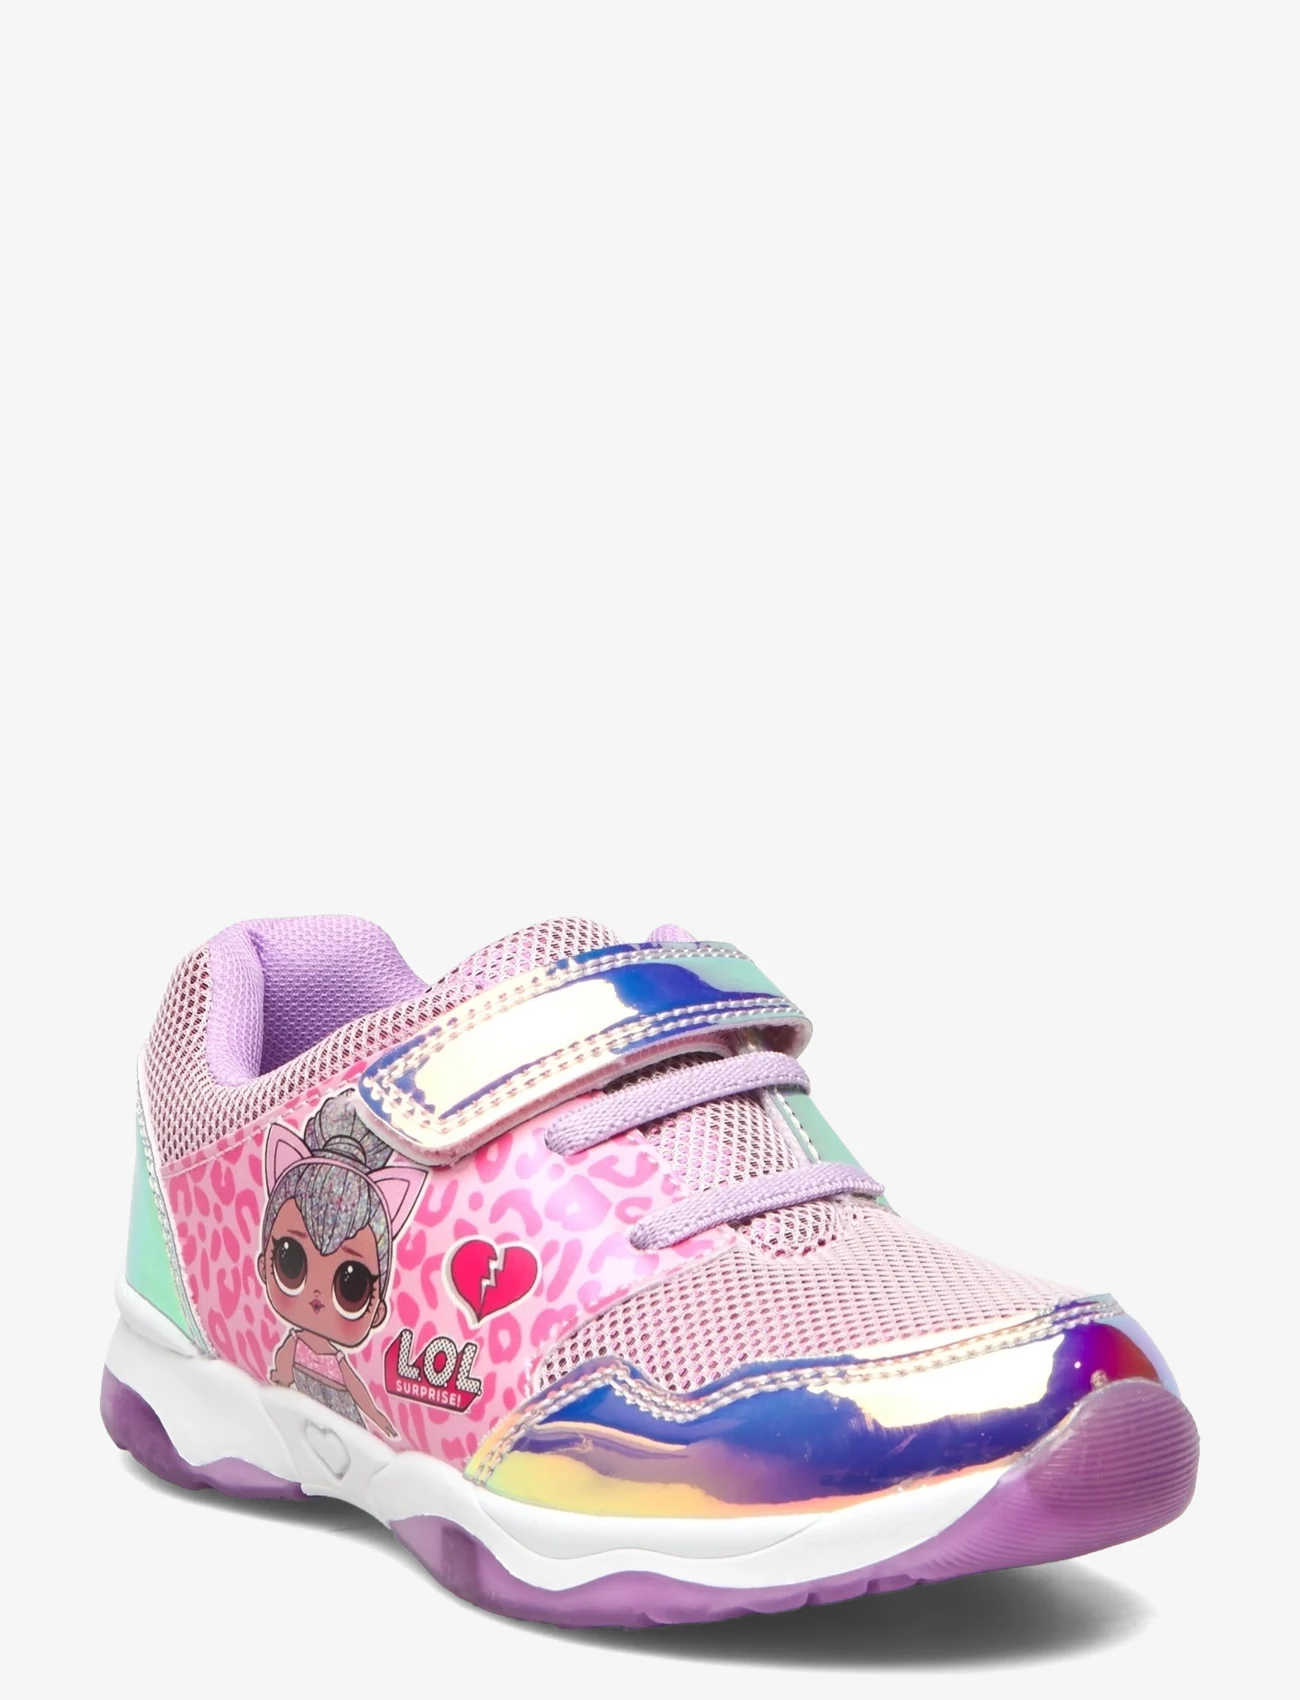 Leomil - Girls sneakers - sommarfynd - pink/lilac - 0